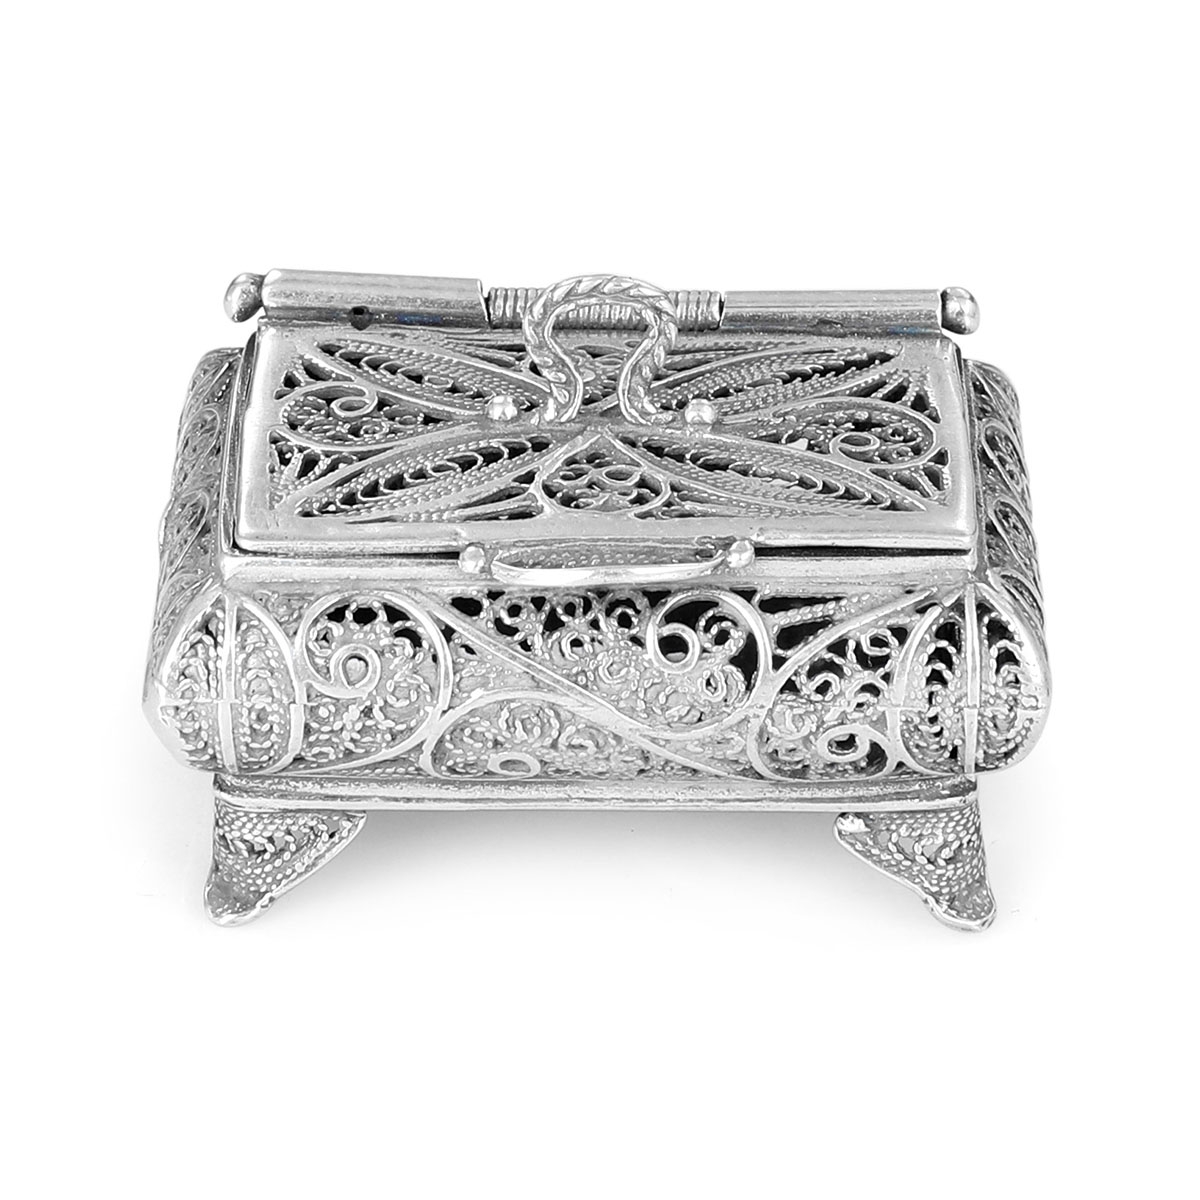 Traditional Yemenite Art Handcrafted Sterling Silver Besamim Spice Box With Filigree Design - 1